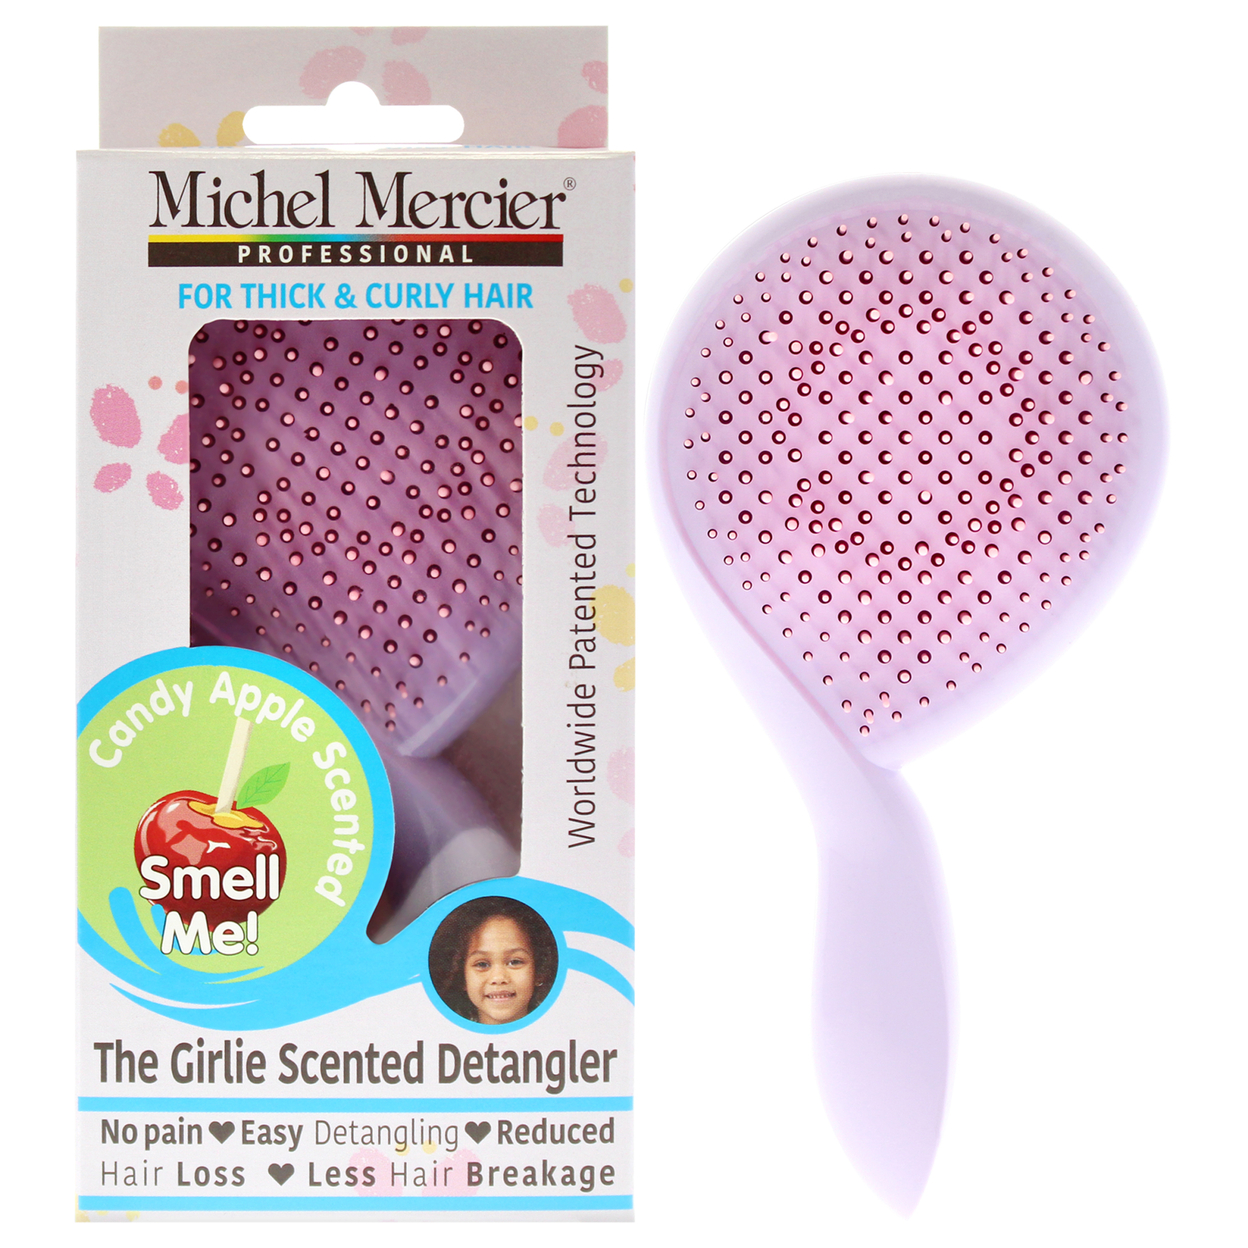 Michel Mercier The Girlie Scented Detangler Brush Candy Apple Thick And Curly Hair - Purple-Pink Hair Brush 1 Pc